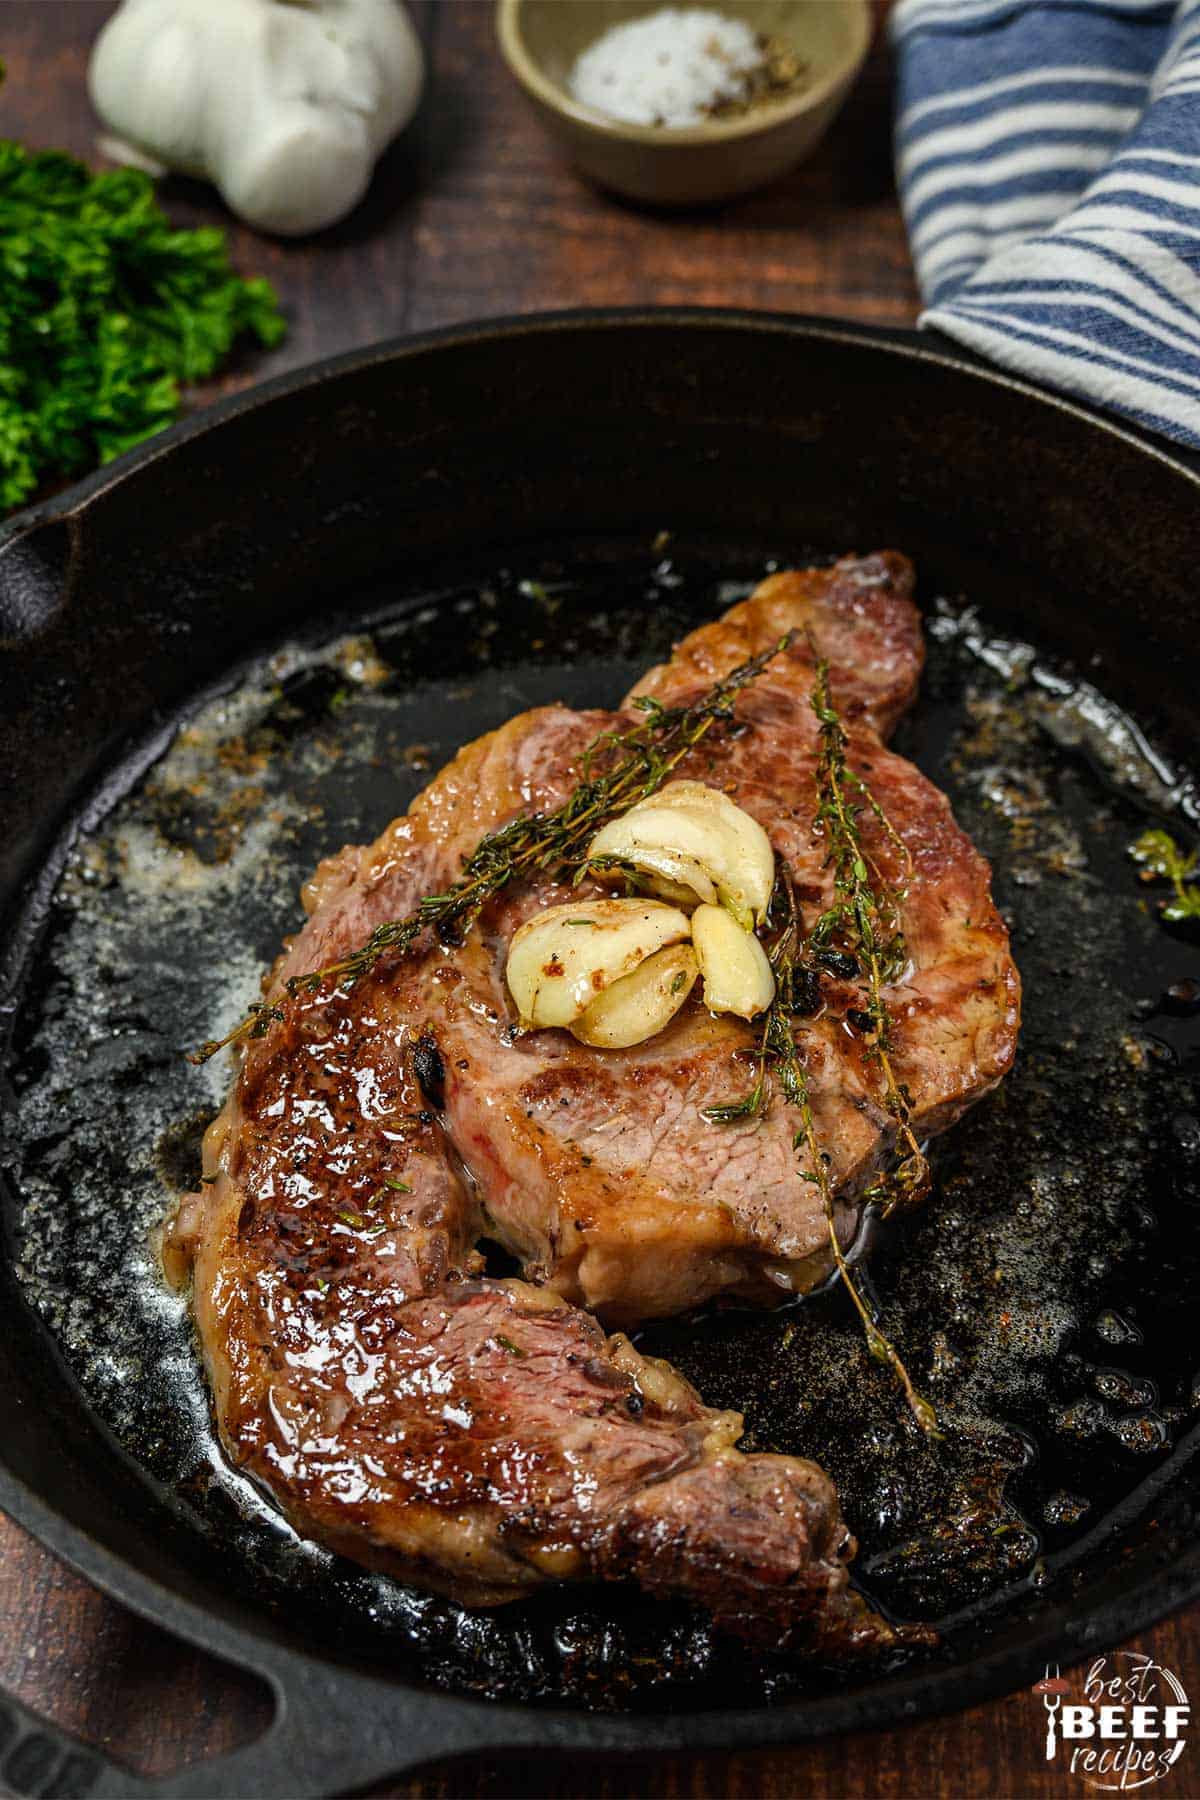 Seared ribeye steak in a pan with cloves of garlic and herbs on top